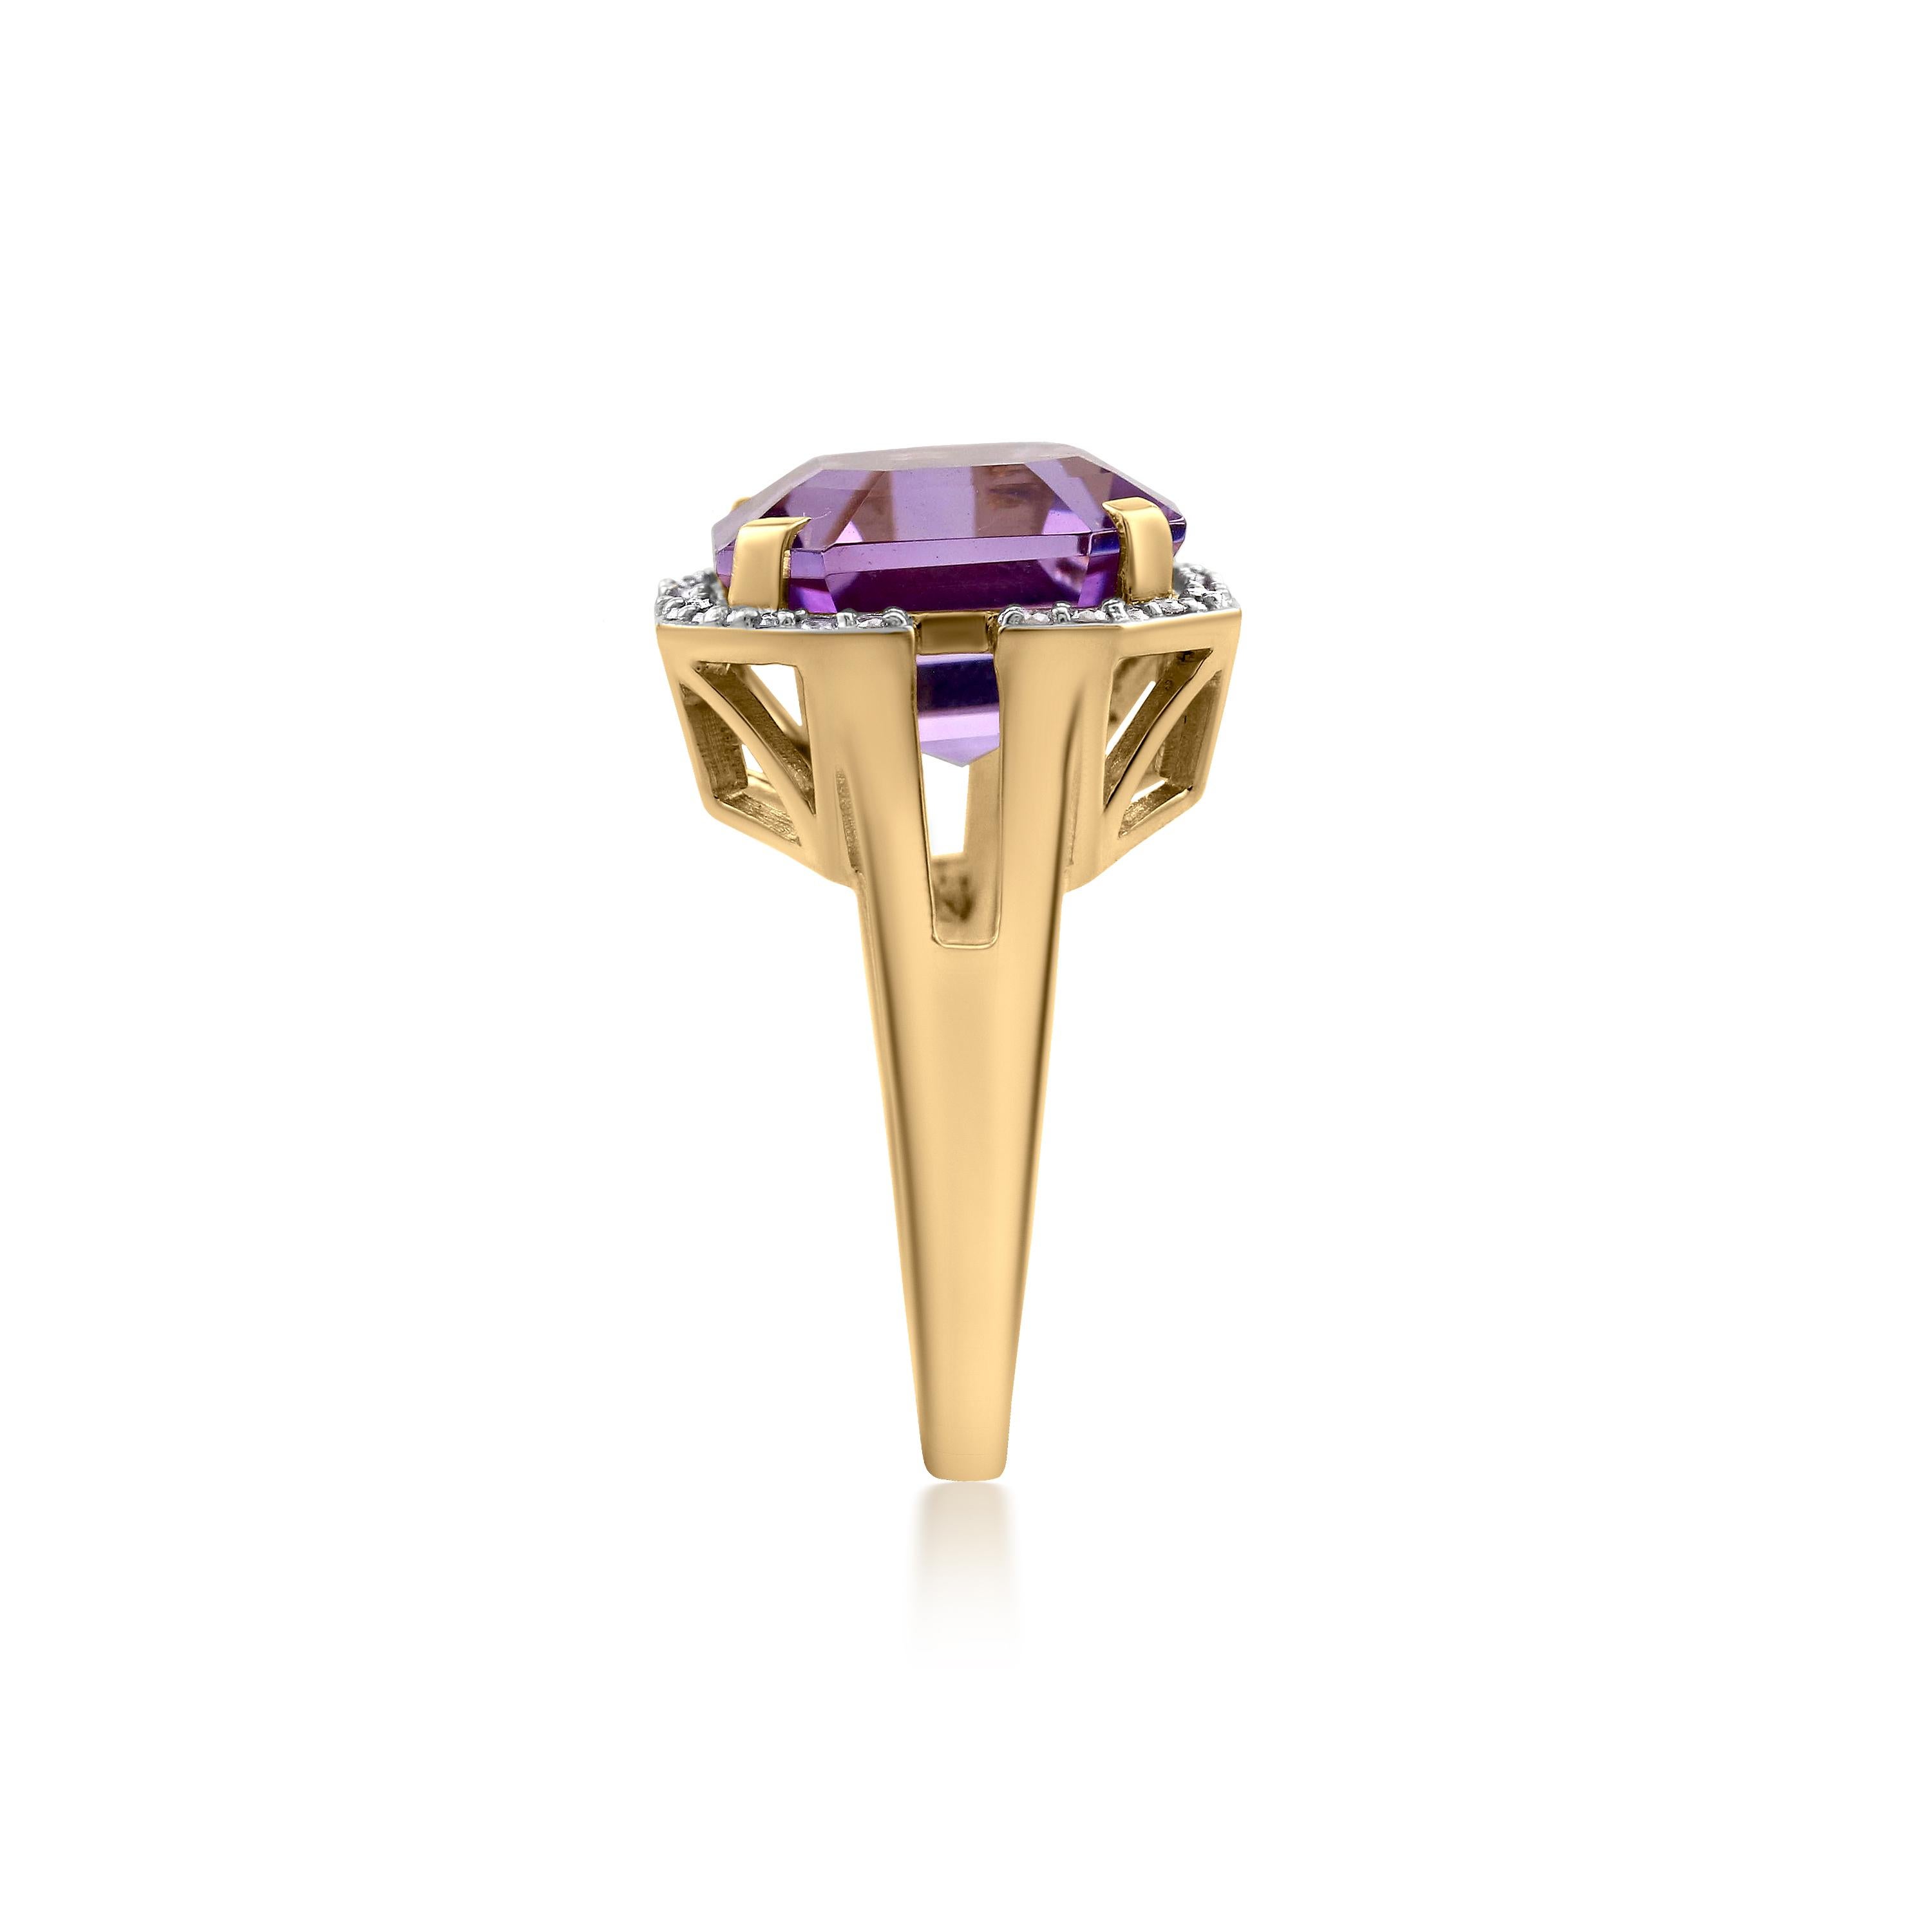 Gemistry 7.6 Carat Asscher Cut Amethyst Solitaire Ring with Diamond in 14K Gold 3